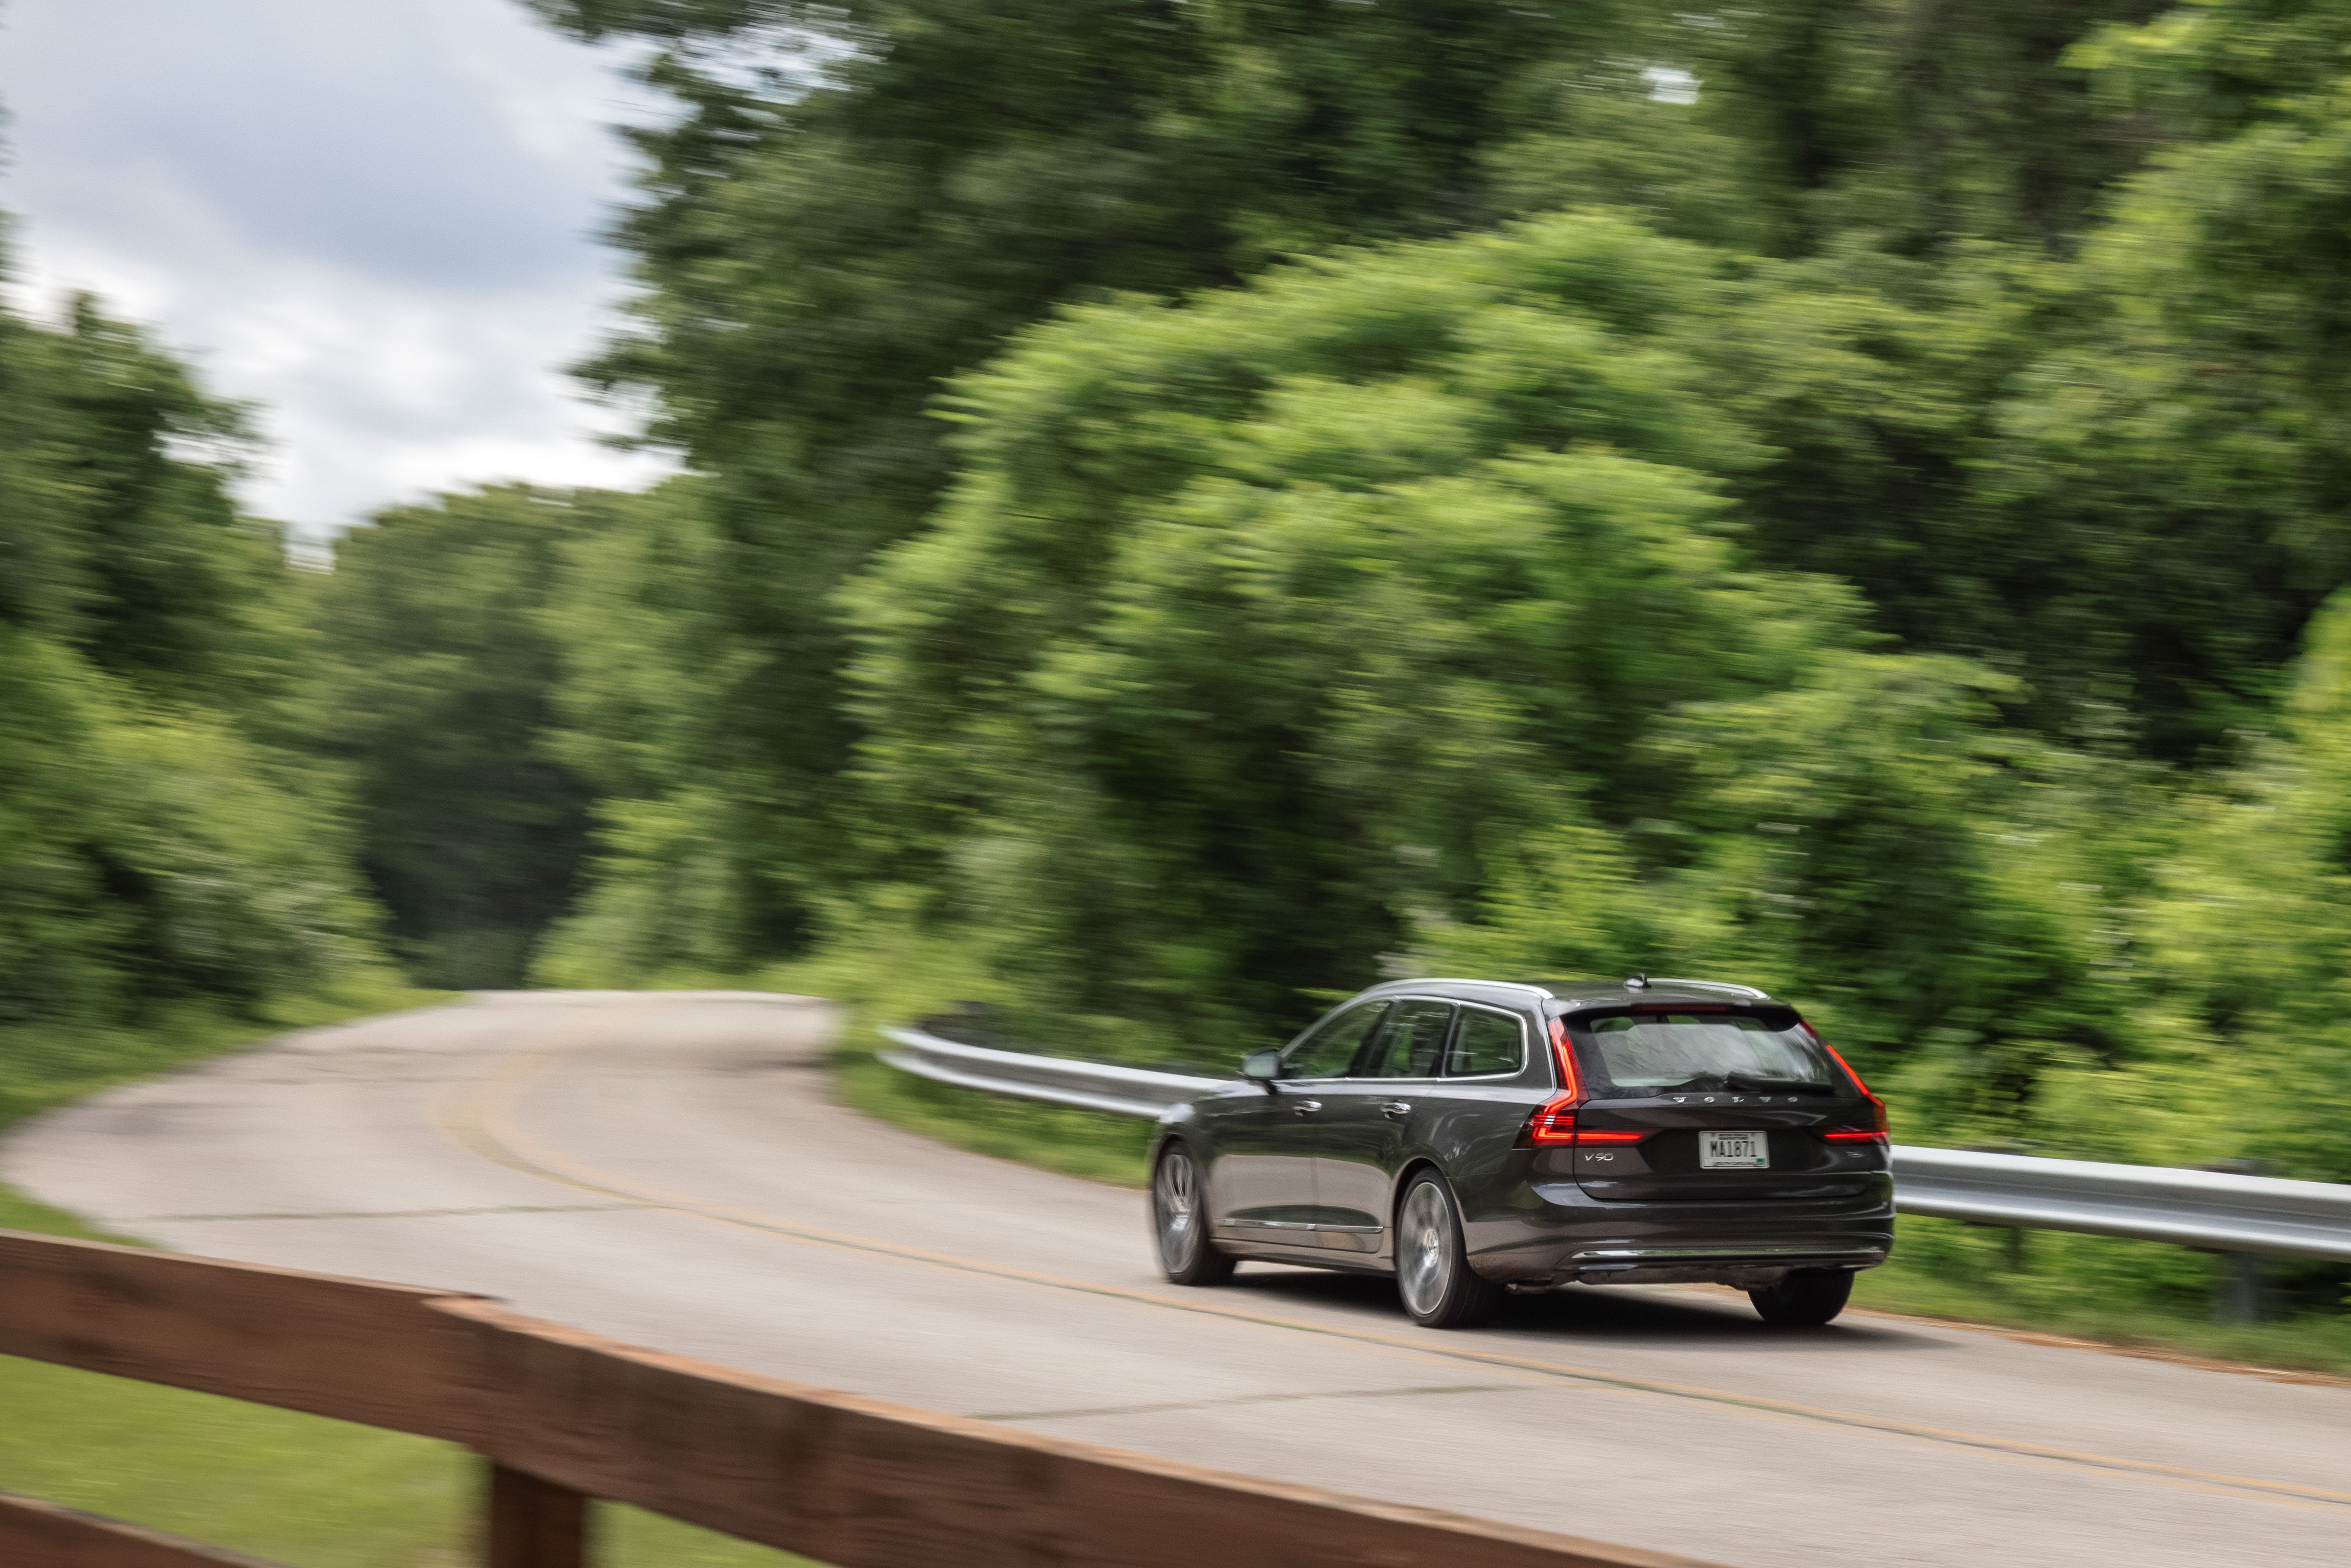 Tested: 2021 Volvo V90 T6 Was Good While It Lasted